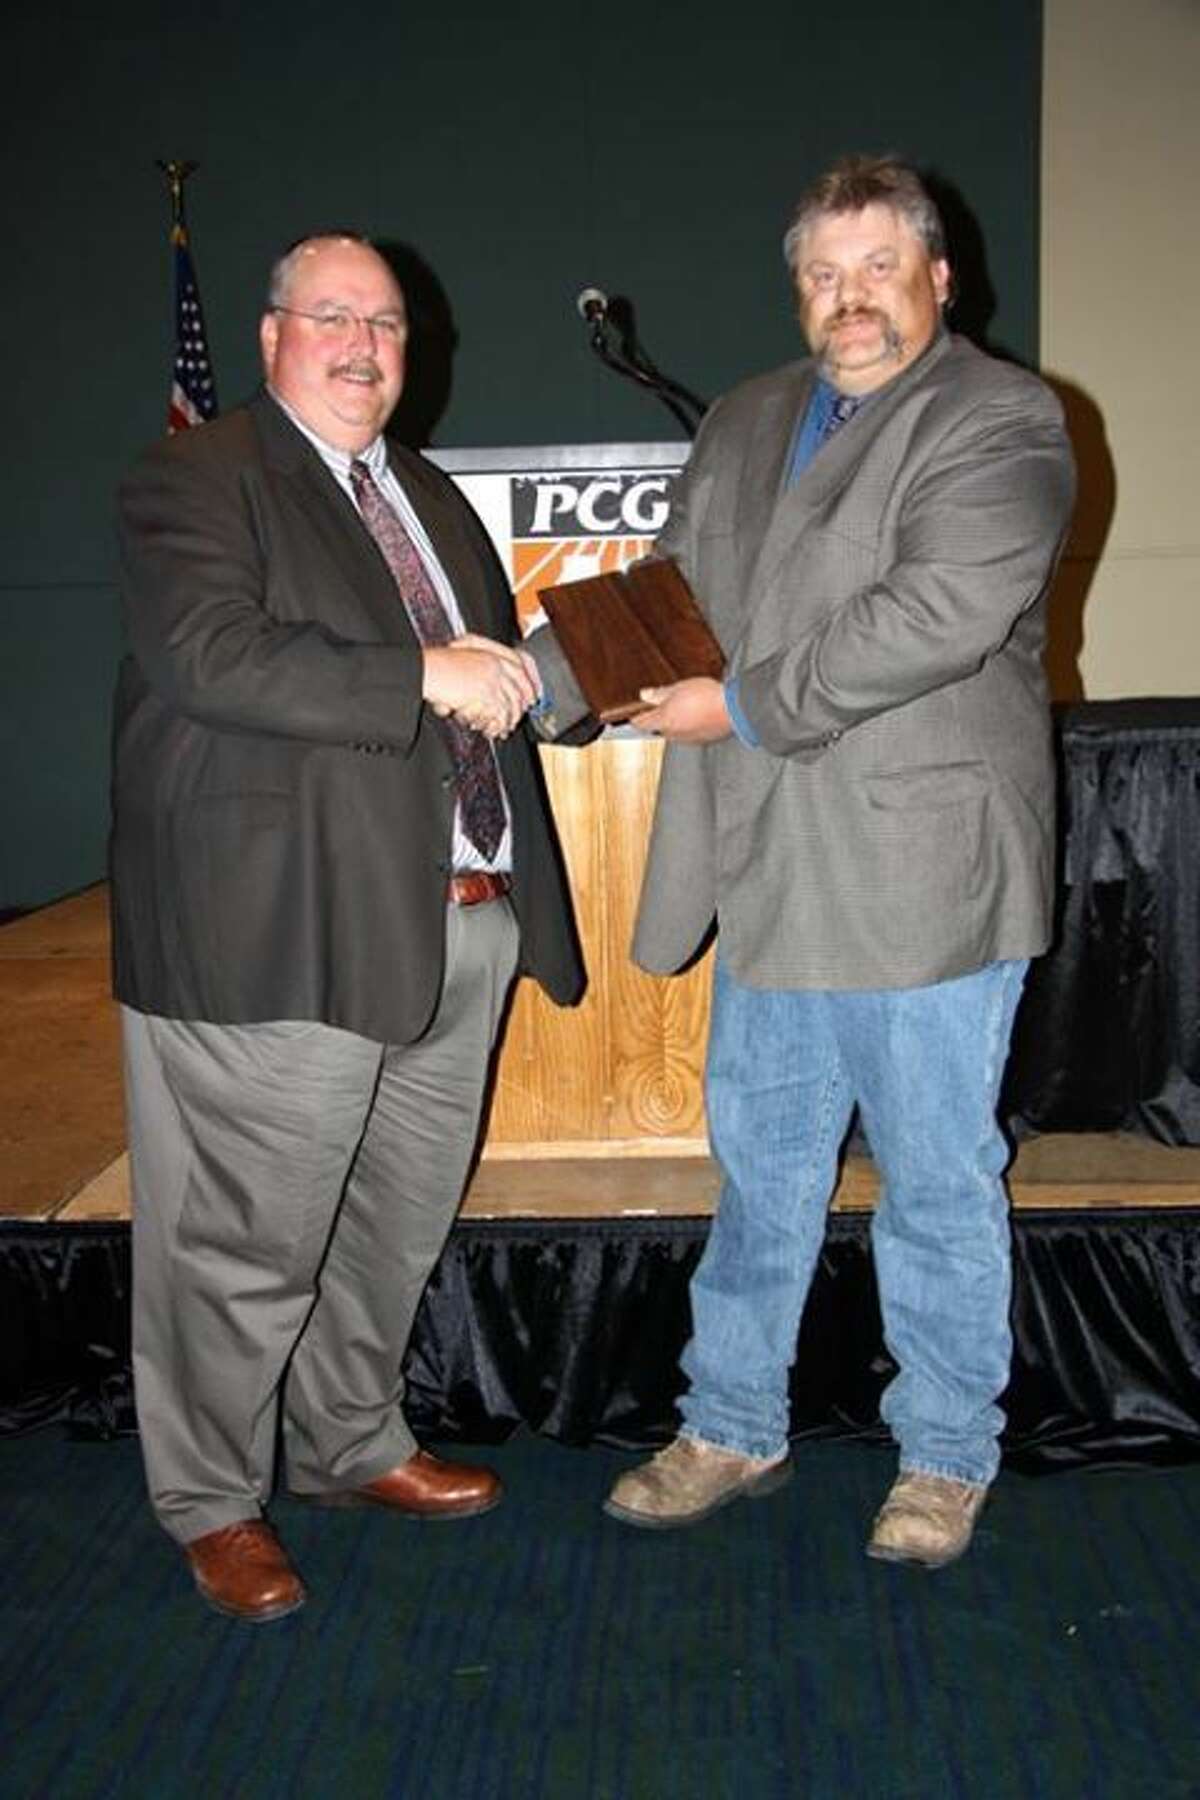 Outstanding Cotton AgentCourtesy Photo/Plains Cotton GrowersBlayne Reed (right) AgriLife Extension Integrated Pest Management agent for Hale, Swisher and Floyd counties, receives the Plains Cotton Growers Outstanding Cotton Agent Award from PCG President Shawn Holladay. In making the presentation during PCG’s annual meeting last week, Holladay said, “Blayne does an outstanding job of utilizing resources and partnering with individuals such as seed companies, producer associations, Extension Specialists, AgriLife Researchers, local businesses, consultants, and many others to make programs successful."